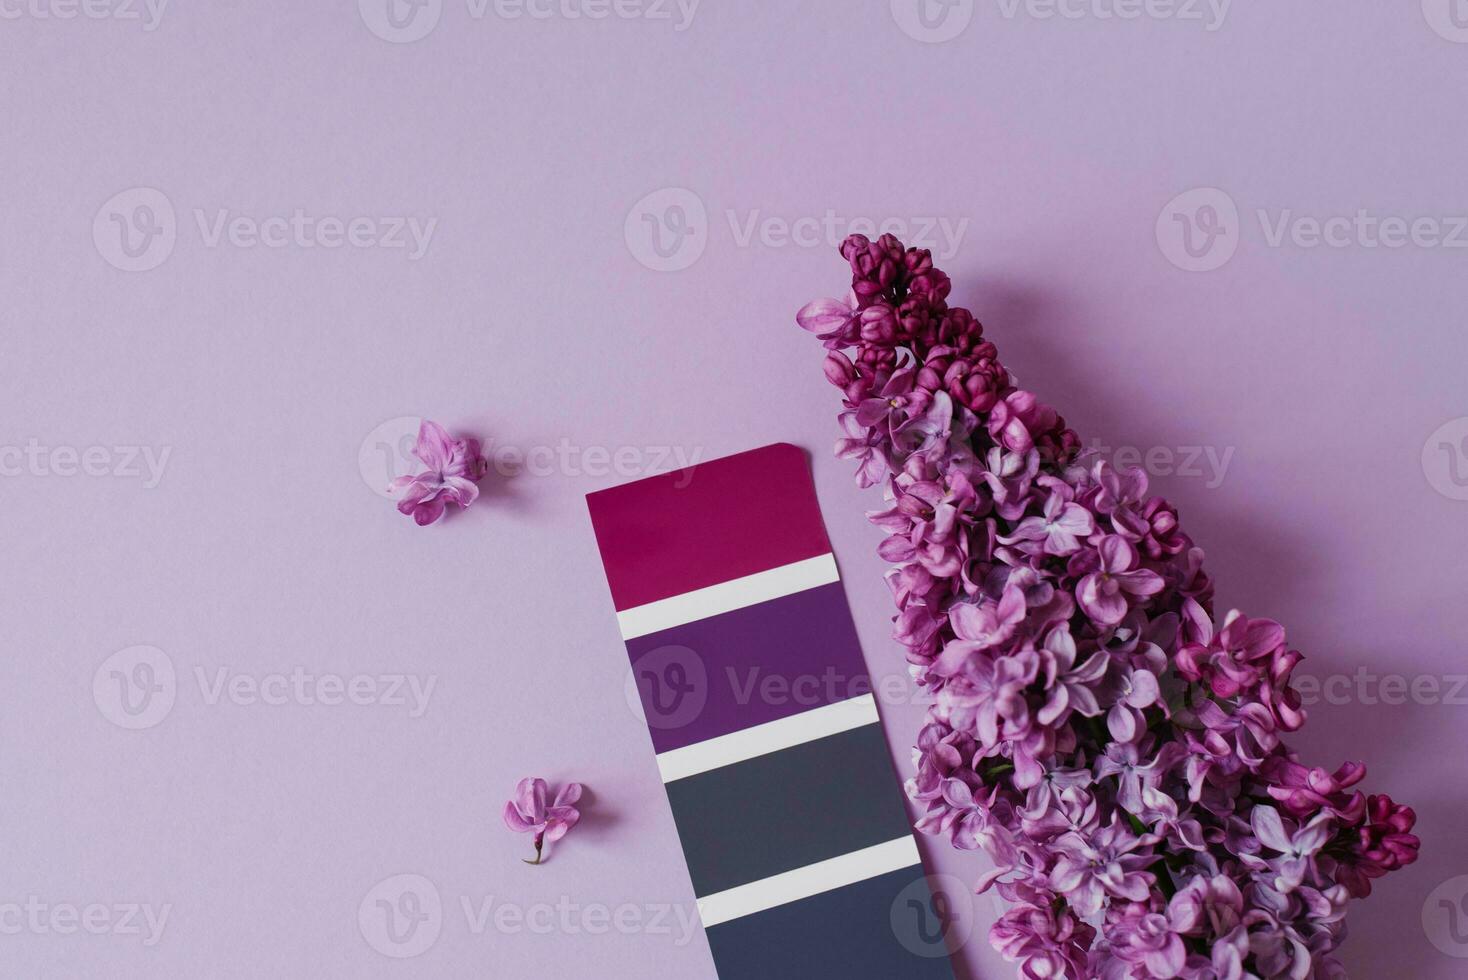 Color catalogue, an example of lilac on paper sample and lilac flowers. The color palette used by the designer to select the correct hue. View from above. photo